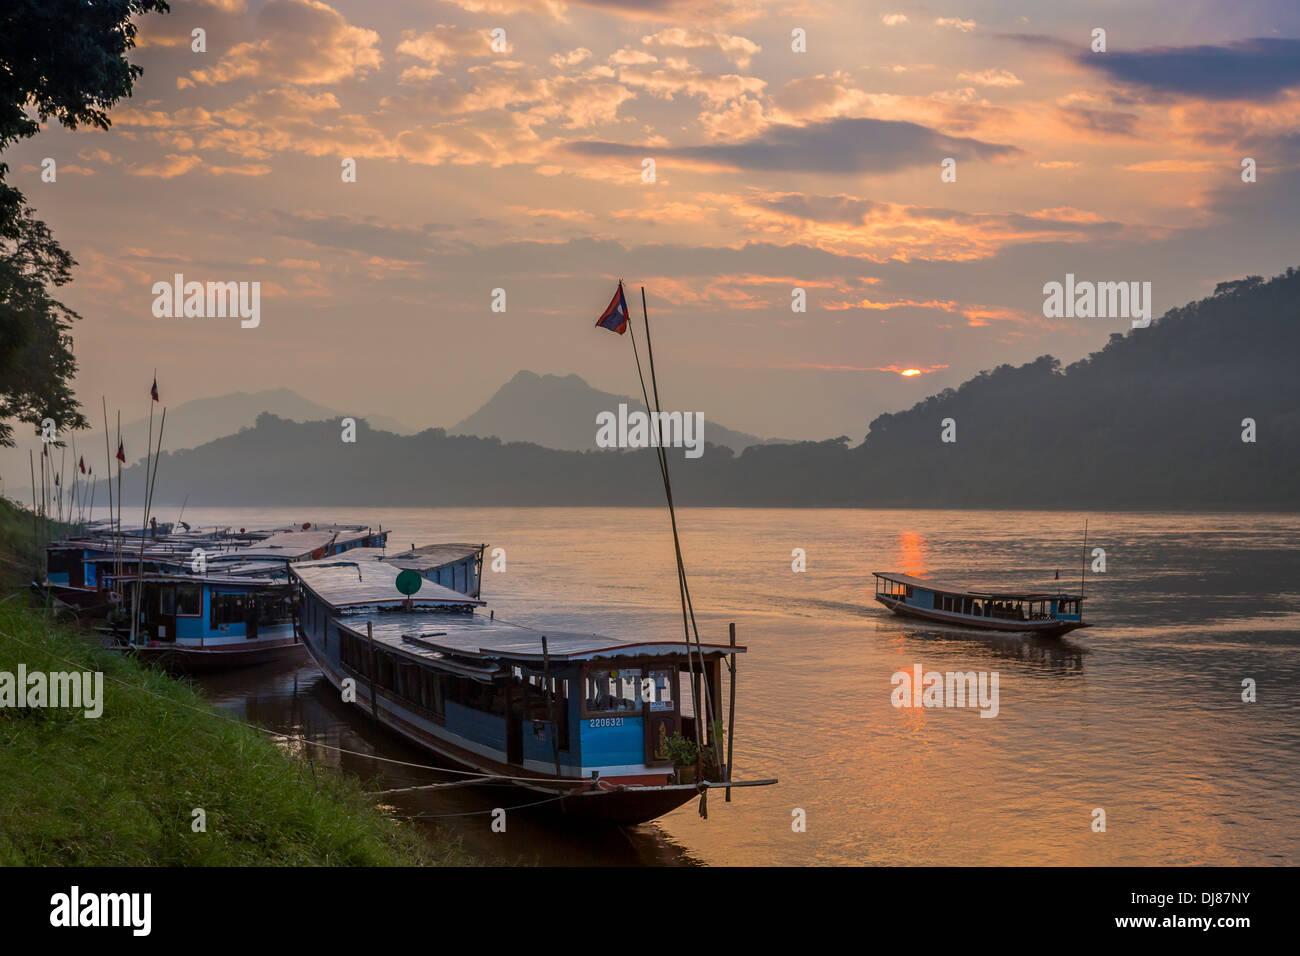 sunset-over-the-mekong-river-in-luang-pr